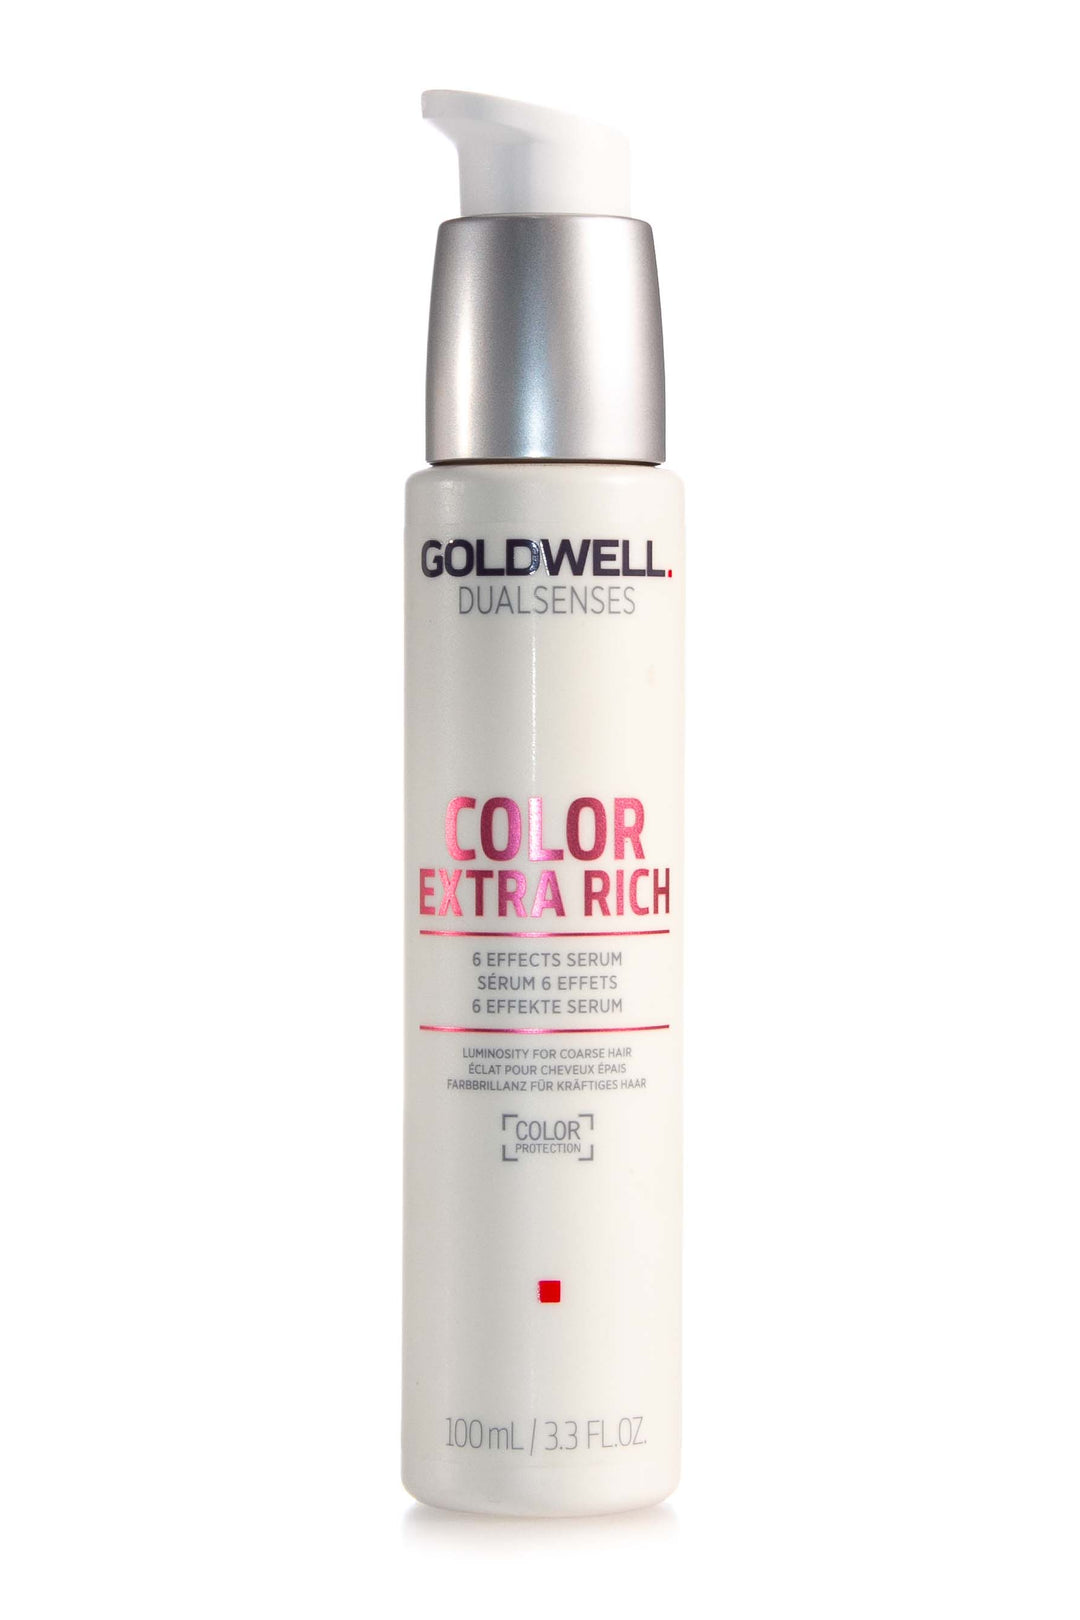 GOLDWELL Dual Senses Color Extra Rich 6 Effects Serum | 100ml